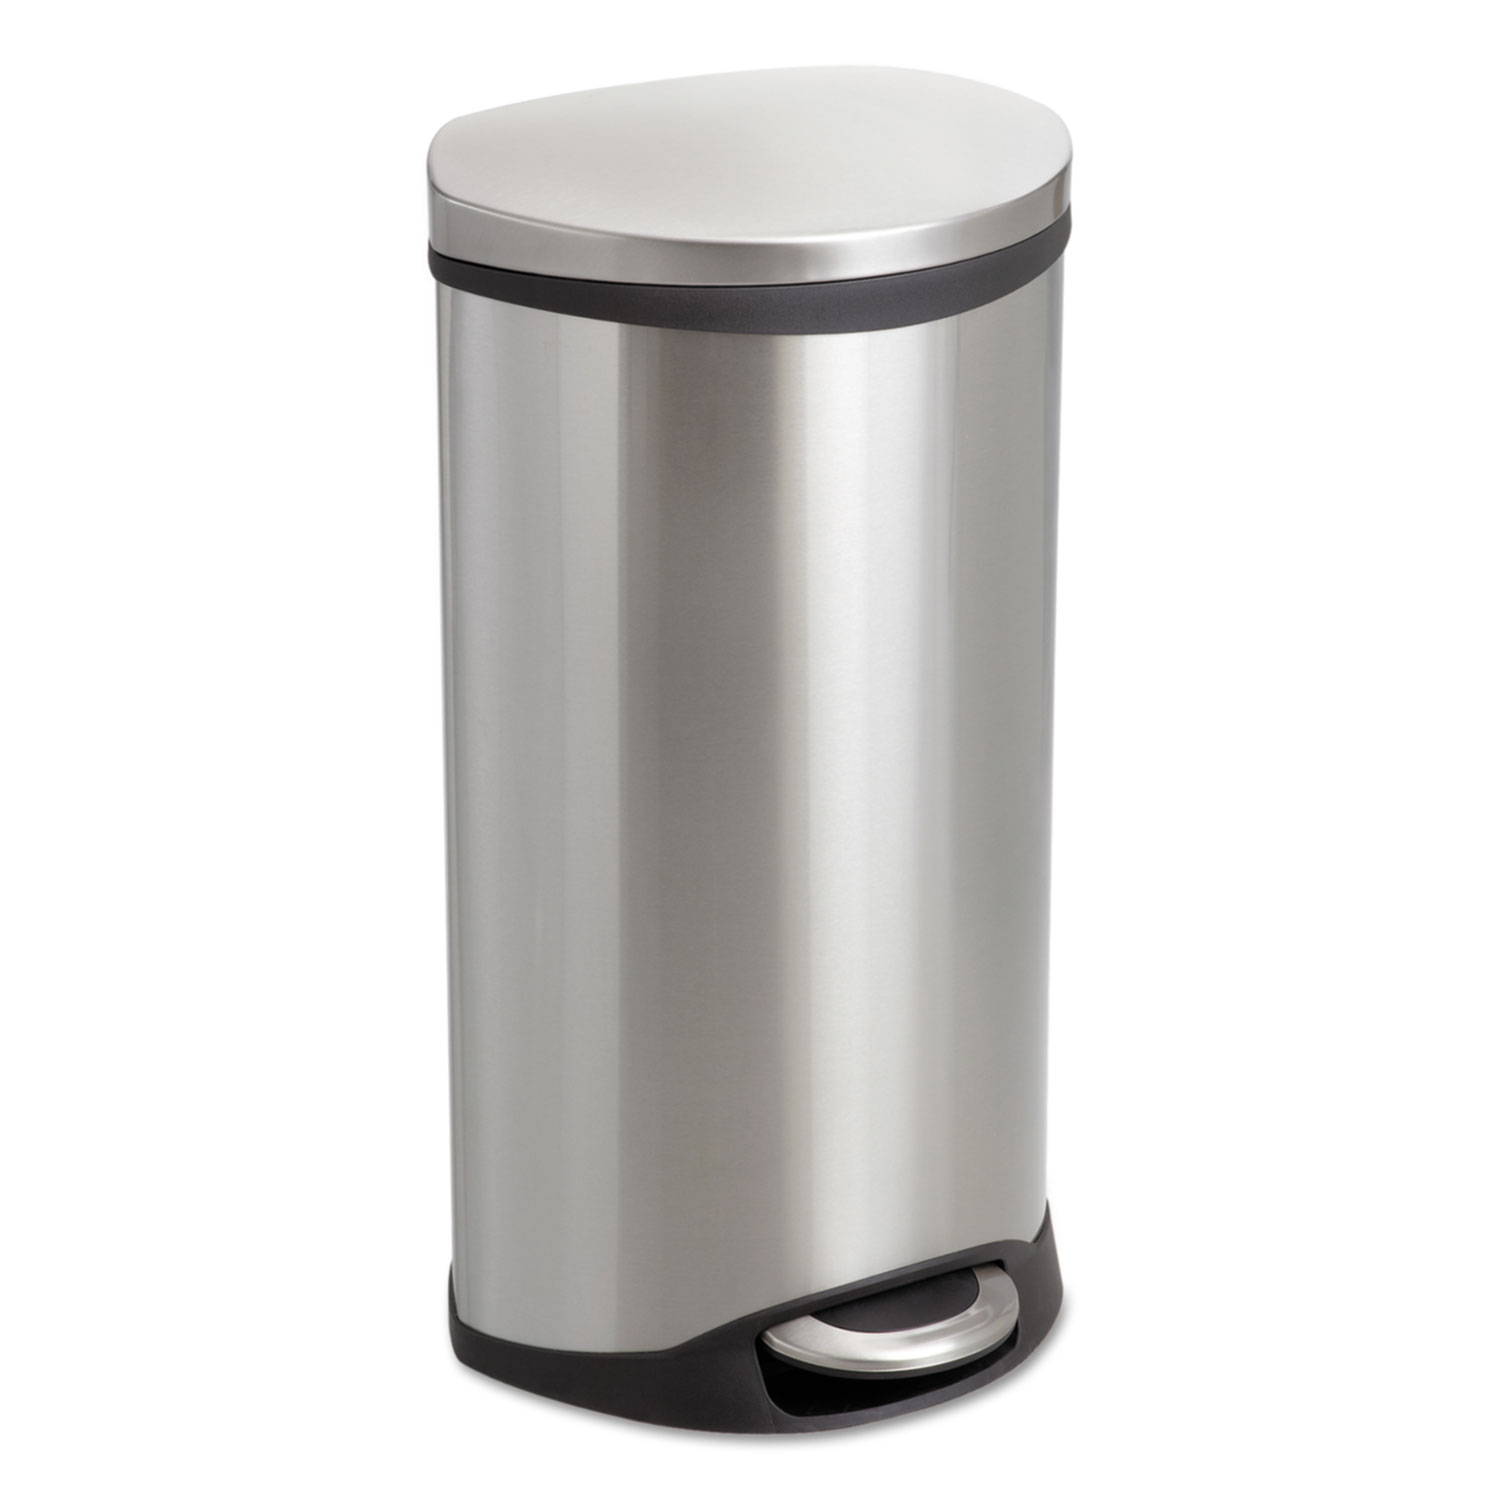  Safco 9902SS Step-On Medical Receptacle, 7.5 gal, Stainless Steel (SAF9902SS) 